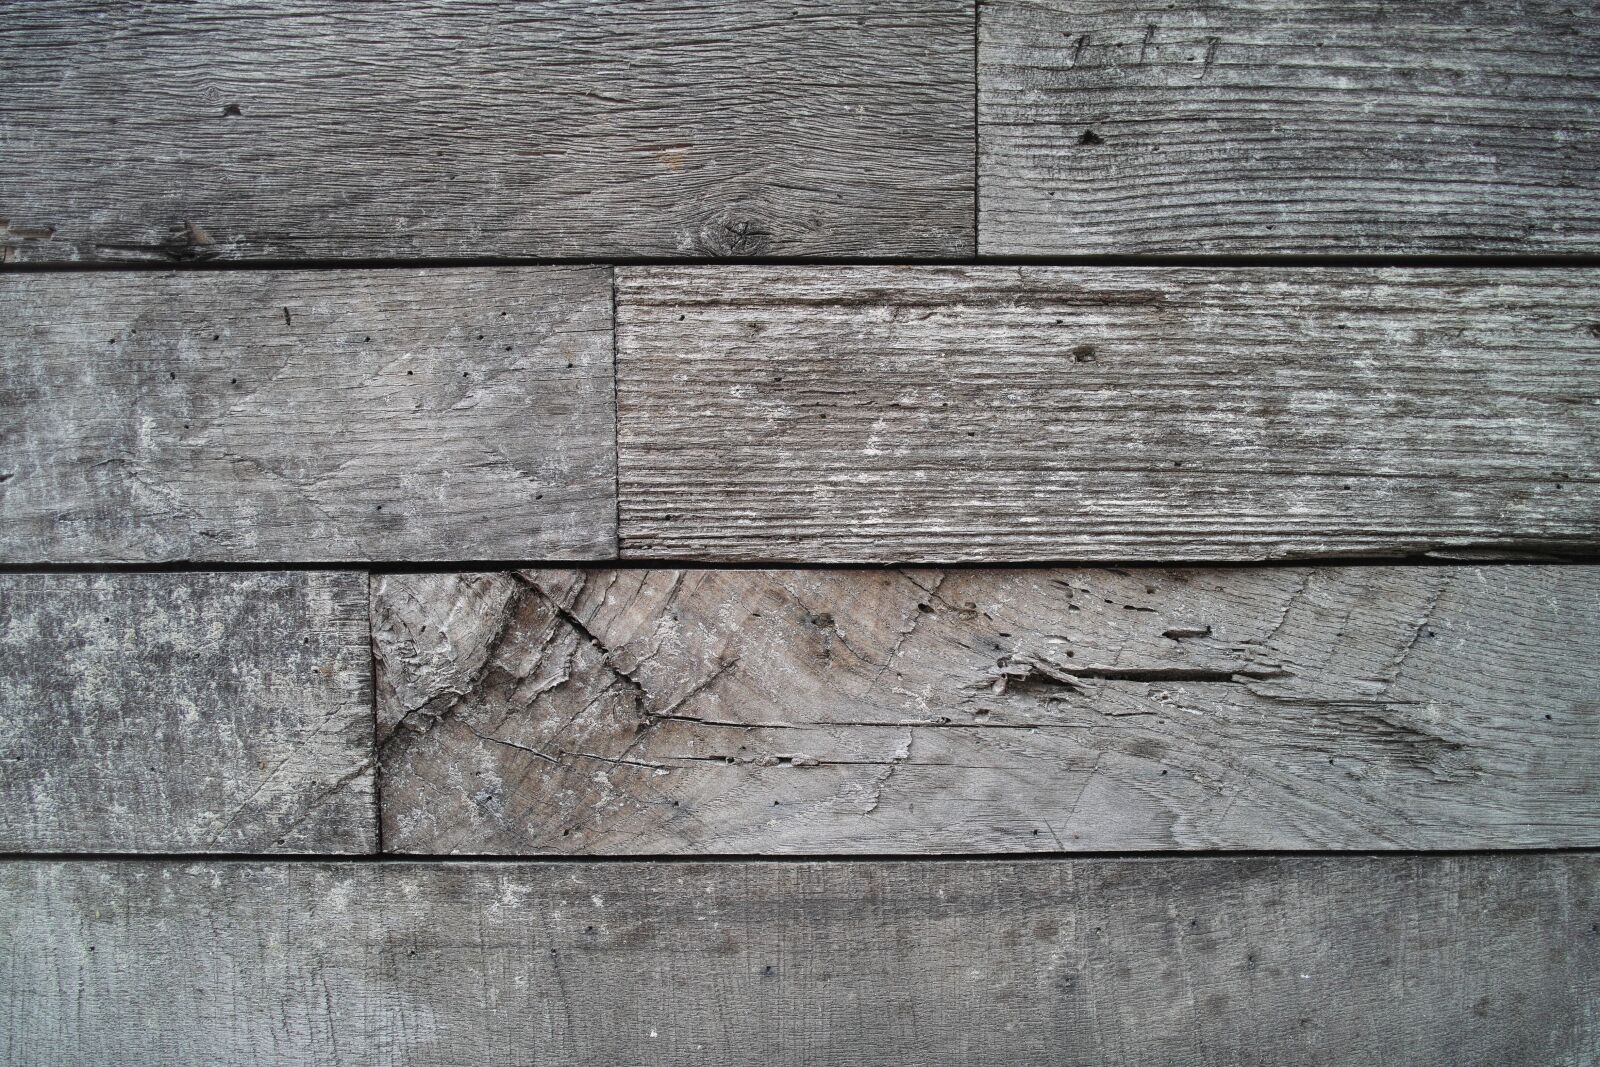 Sigma DP1 Merrill sample photo. Wood-fibre boards, wood, backgrounds photography